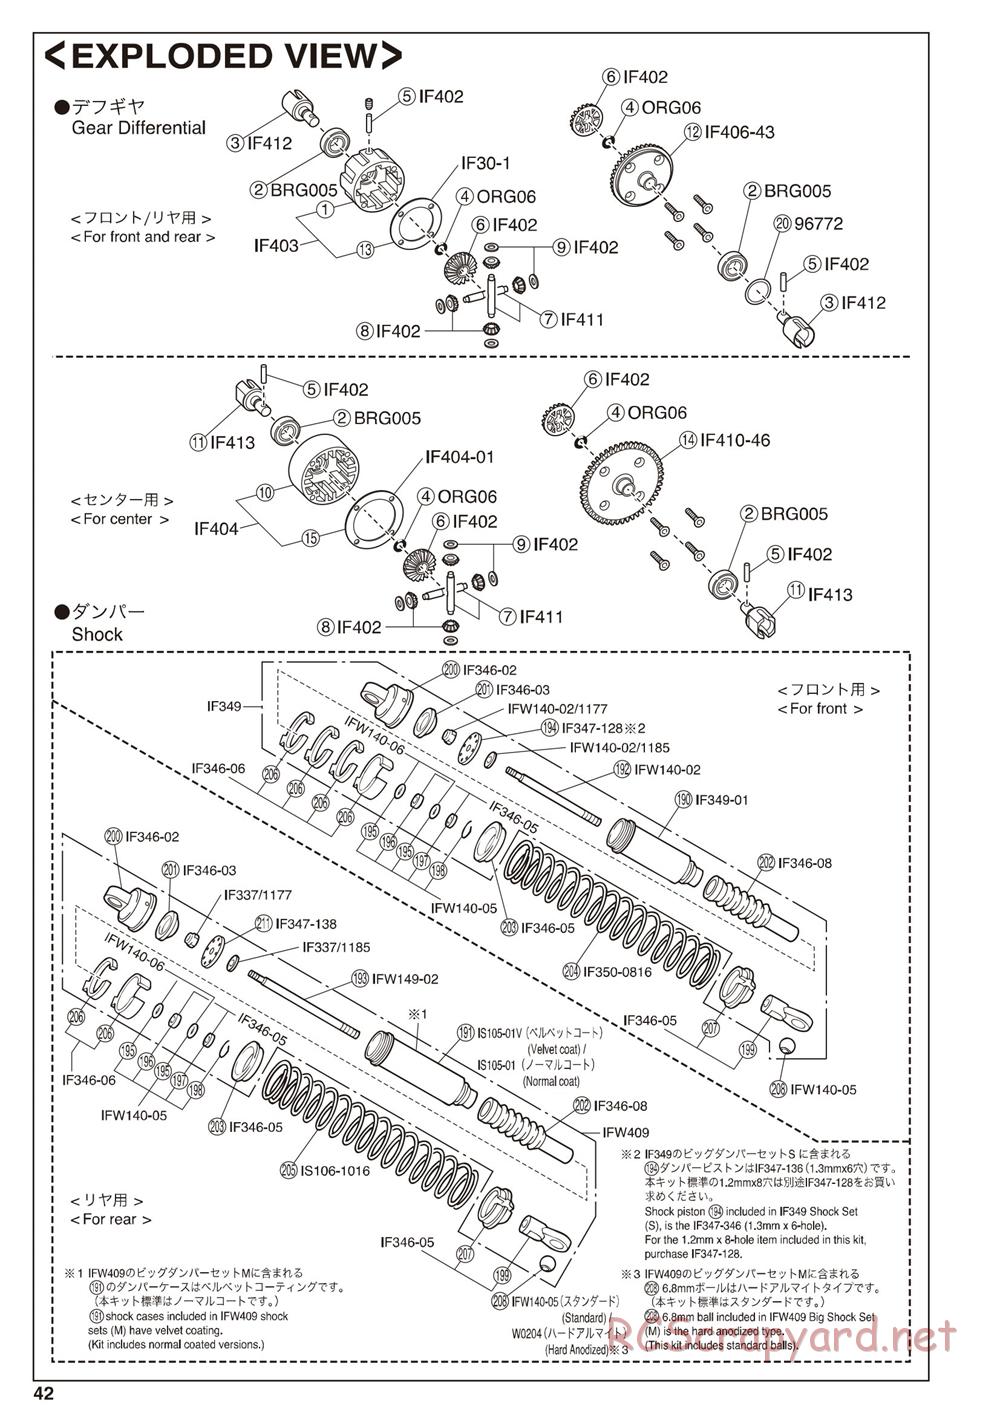 Kyosho - Inferno MP9e - Exploded Views - Page 2